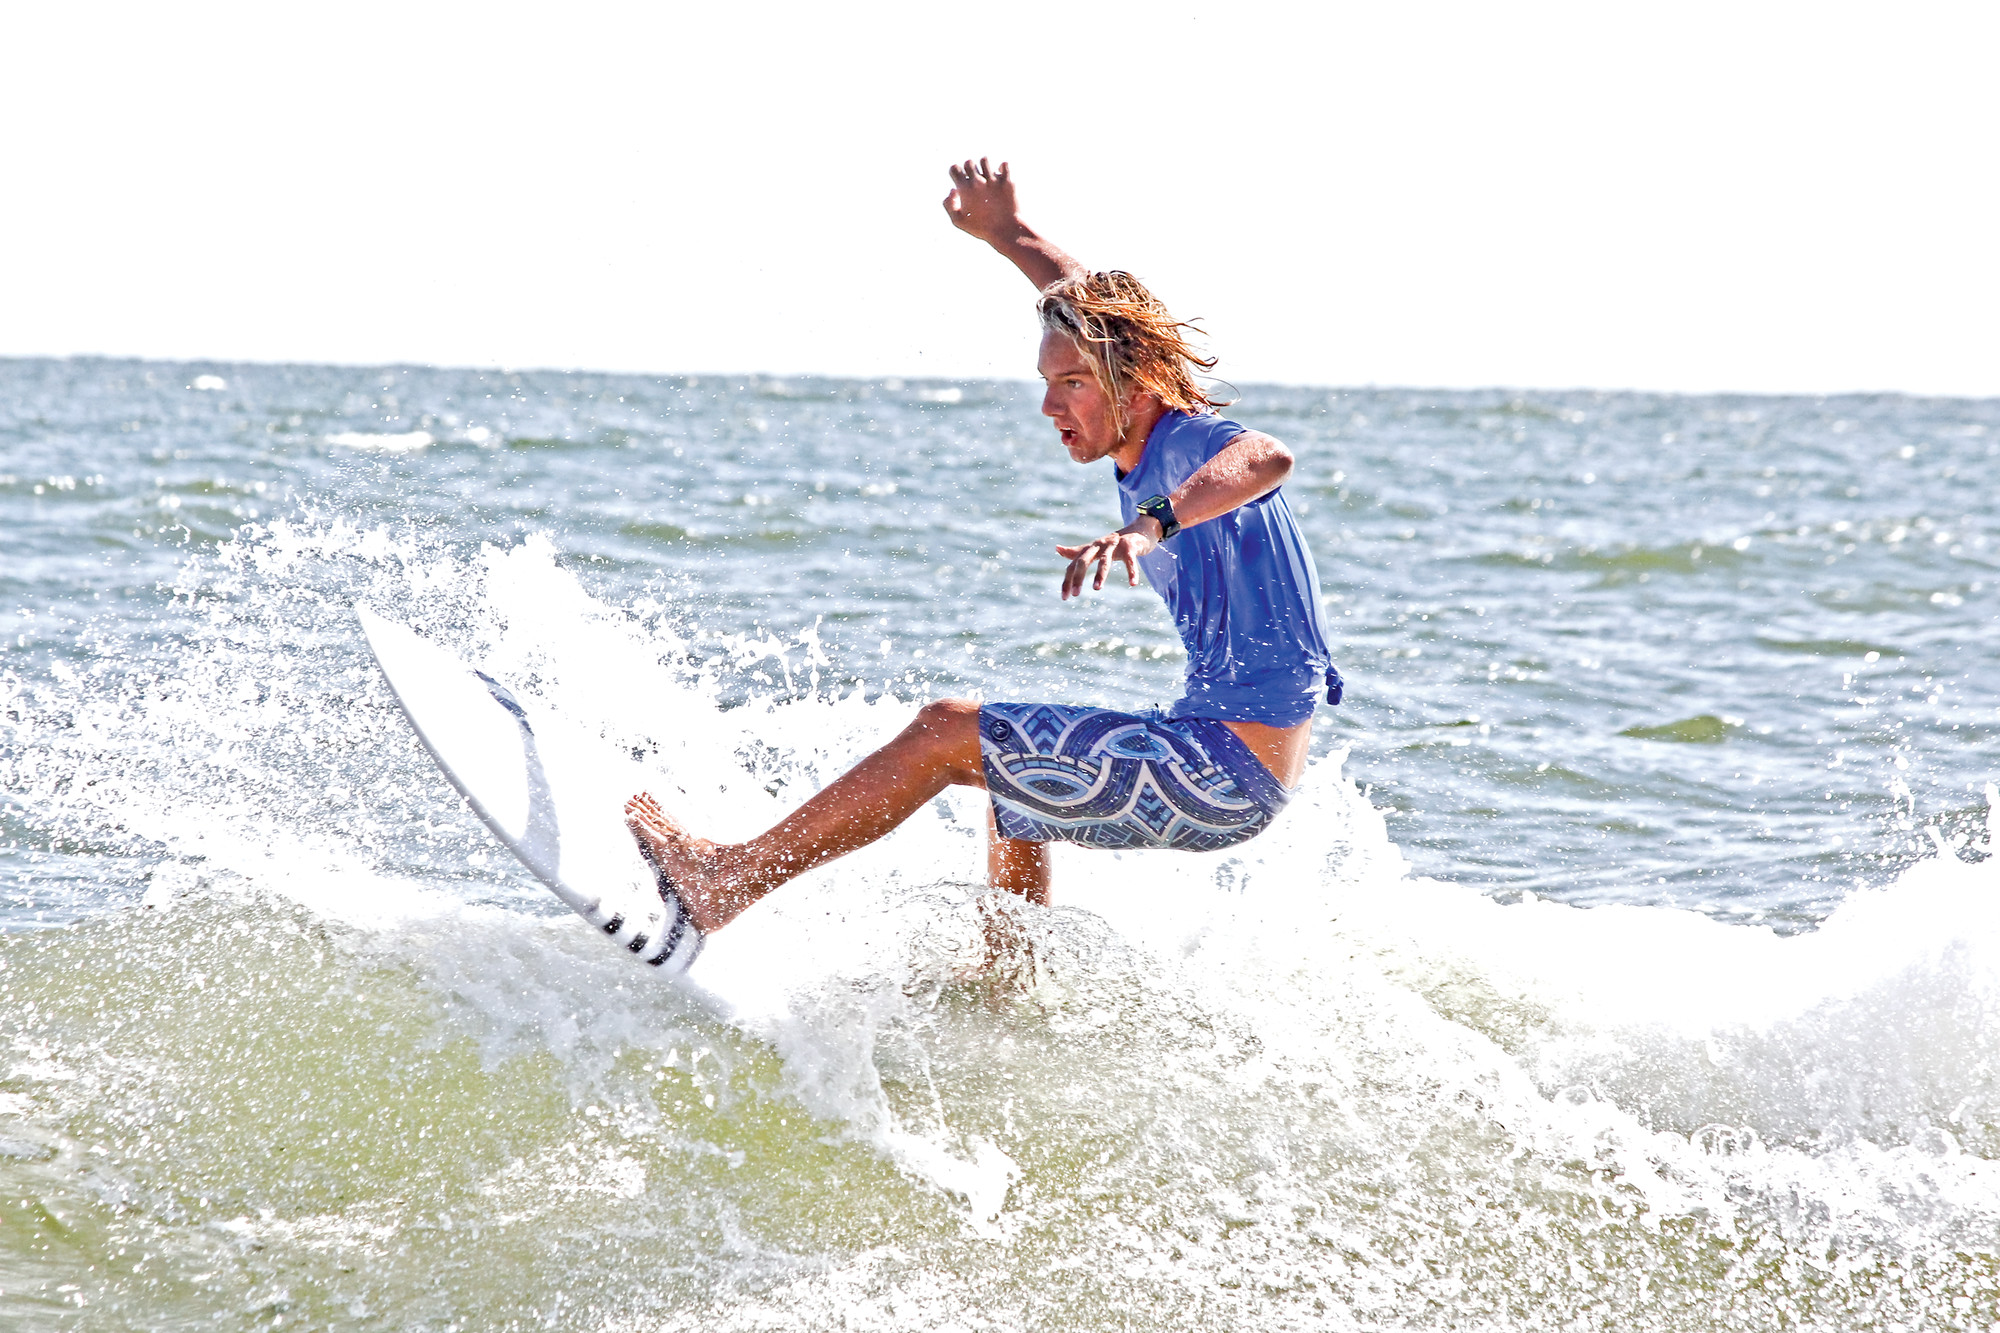 Bo Raynor rode the waves during the surf competition.